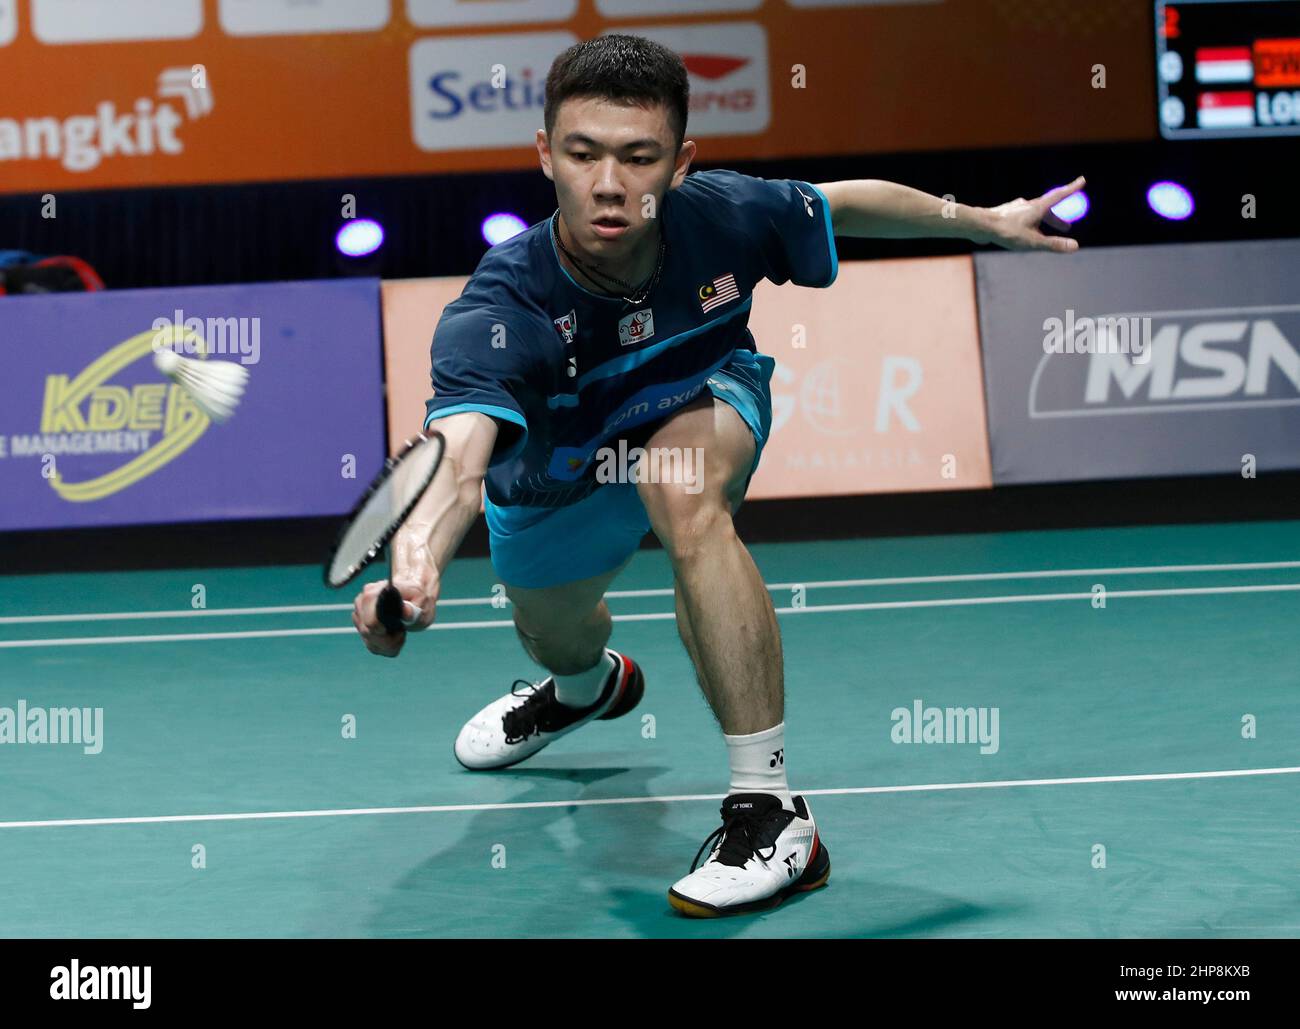 Lee Zii Jia of Malaysia plays against Jeon Hyeok Jin of South Korea during the team mens singles match at the Badminton Asia Team Championships 2022 in Shah Alam on the outskirt